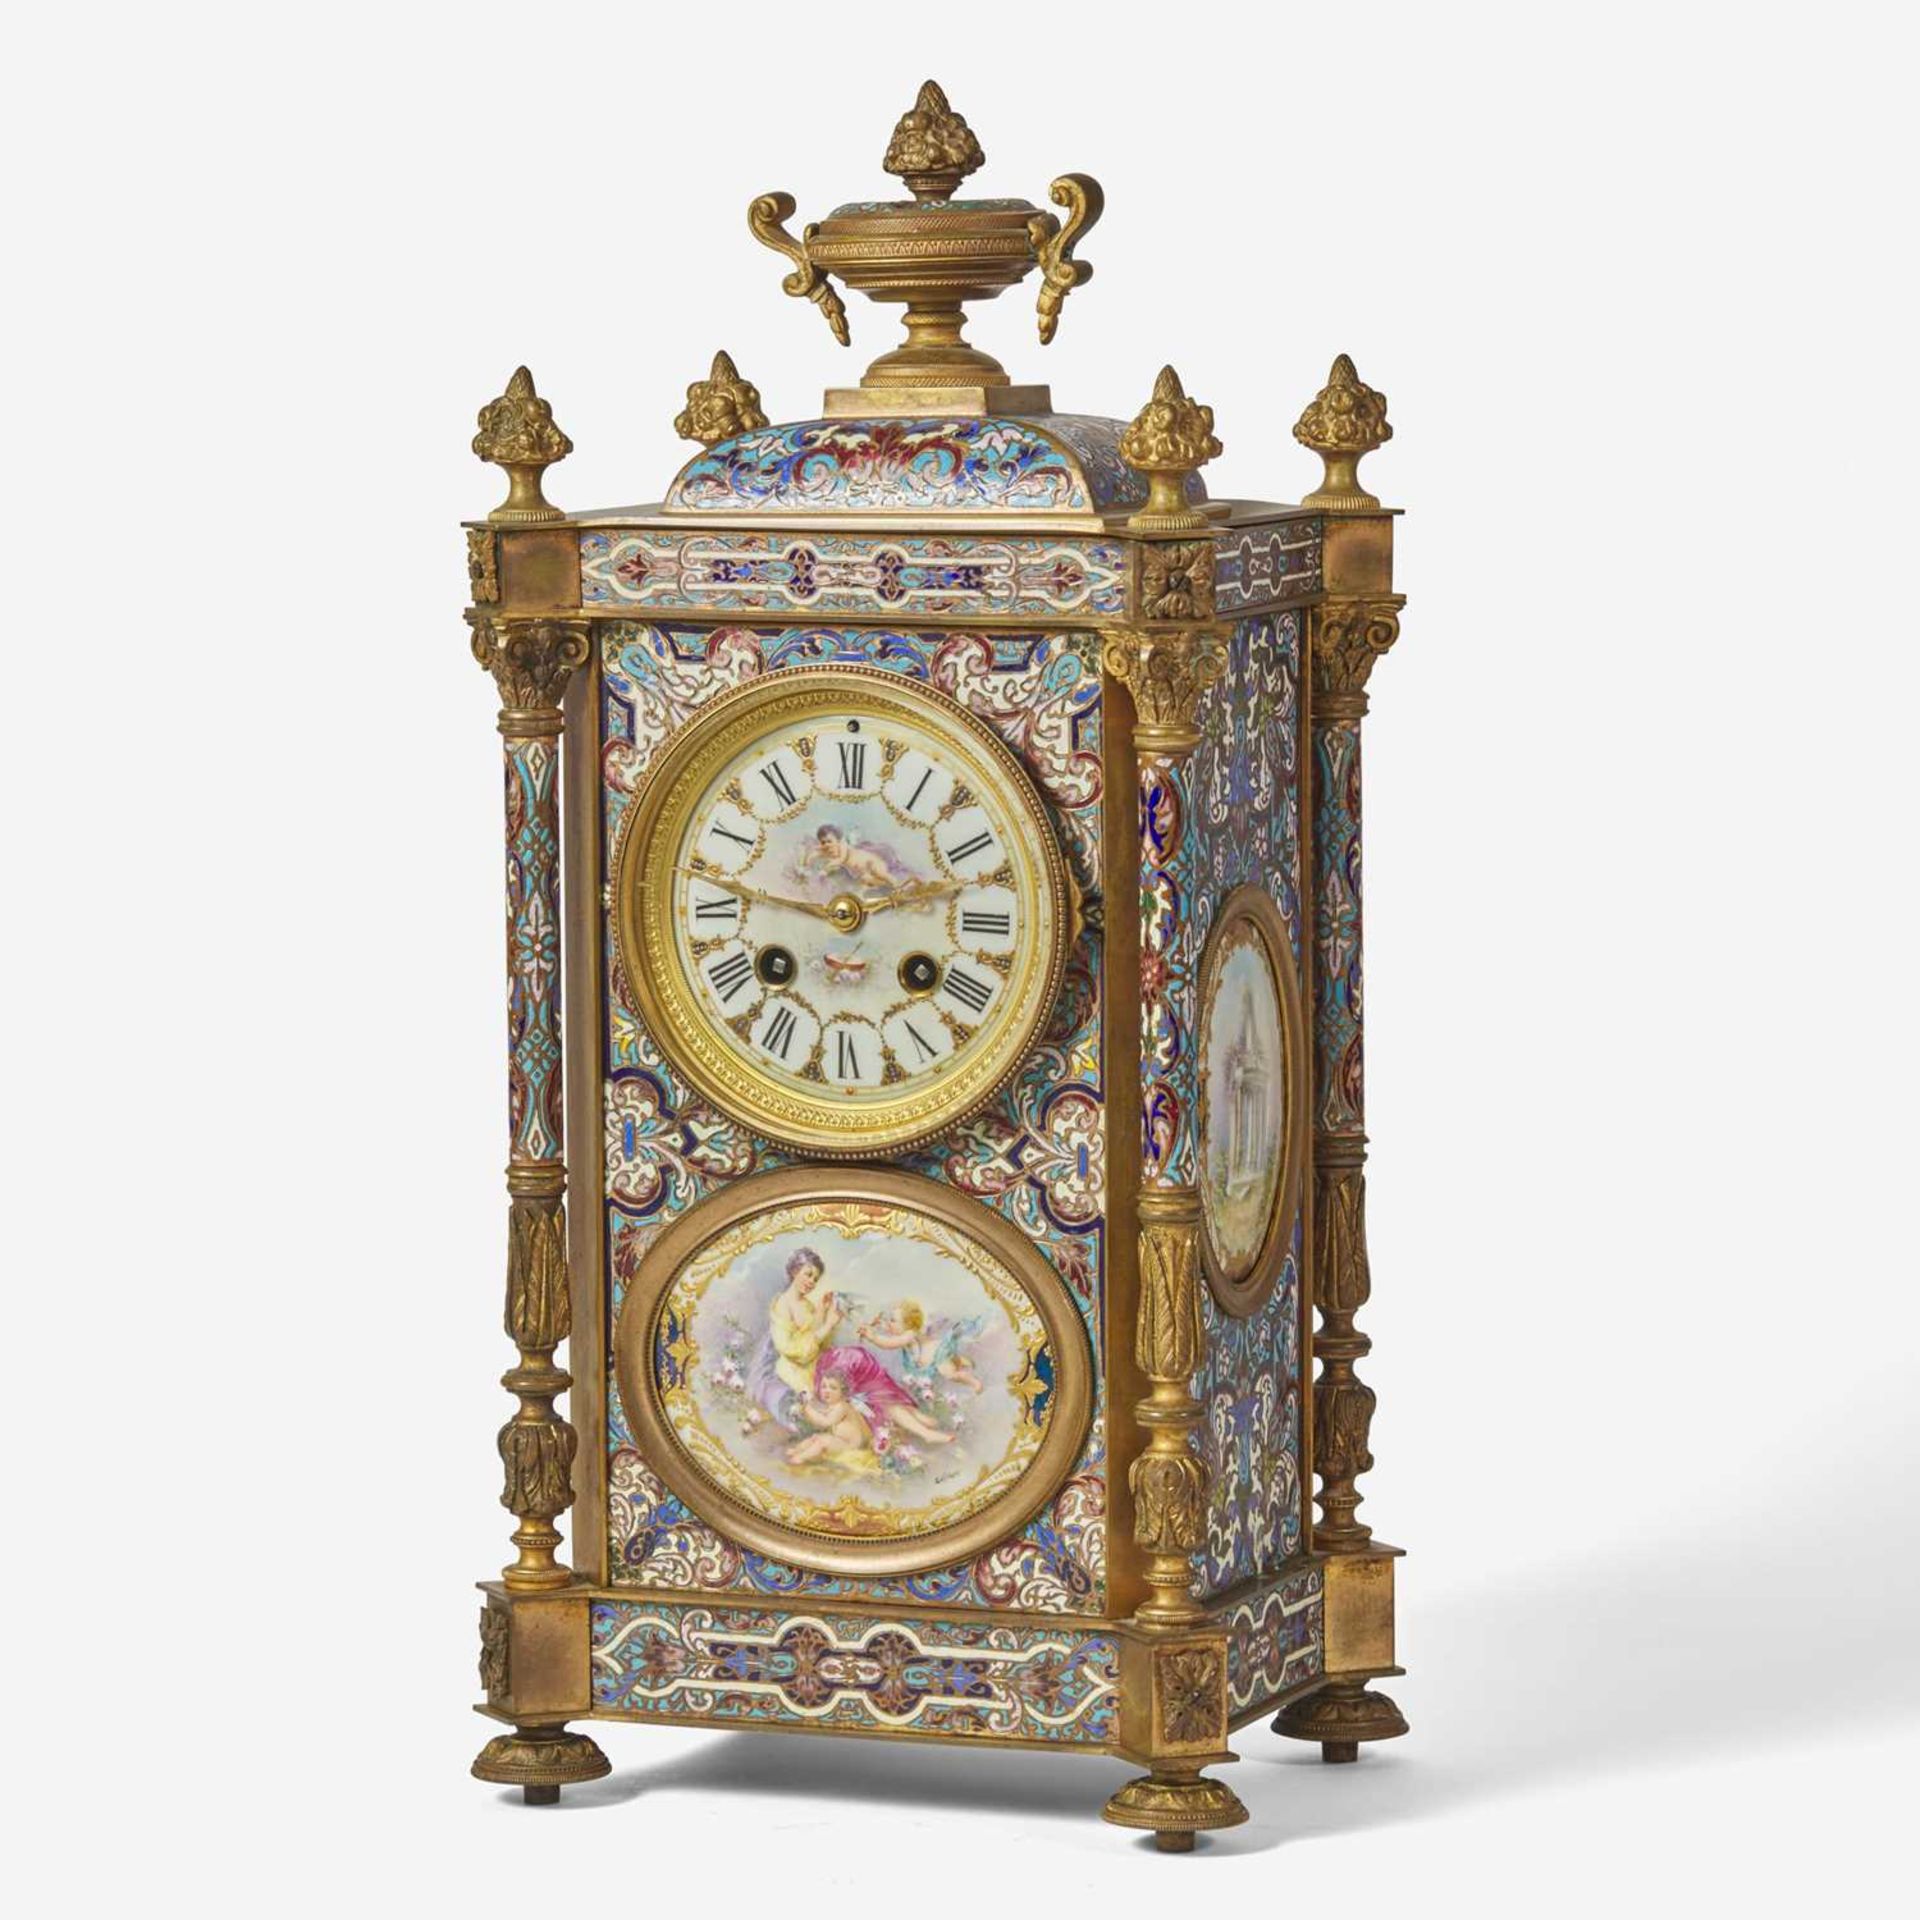 A French cloisonné enamel and gilt-bronze mounted mantel clock with painted porcelain set - Image 2 of 4